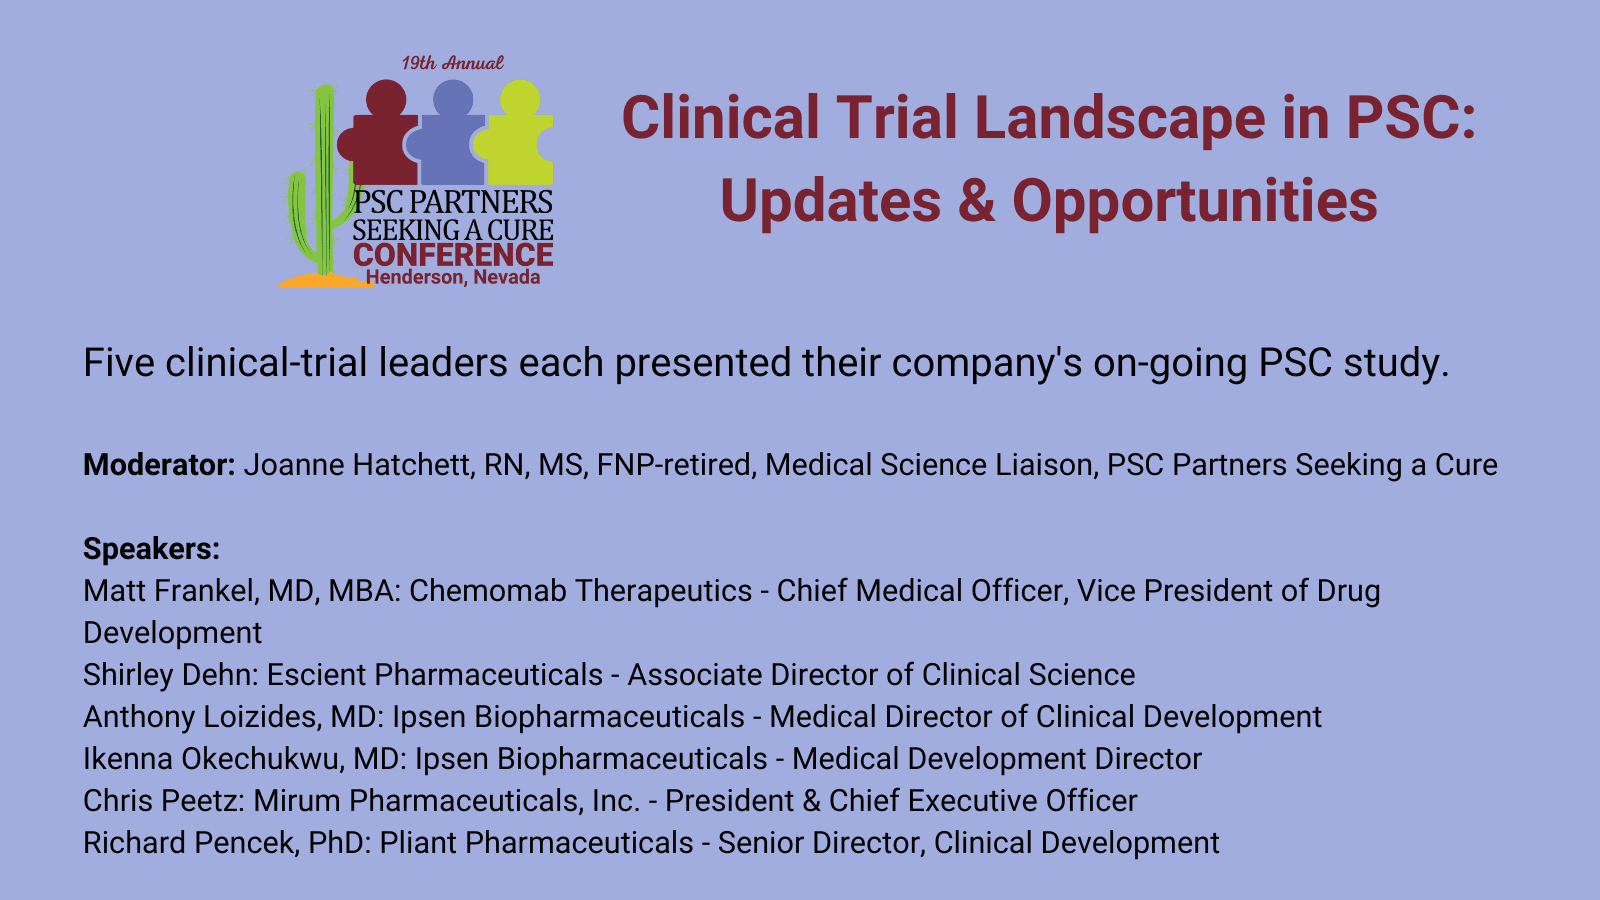 Clinical Trial Landscape in PSC: Updates & Opportunities